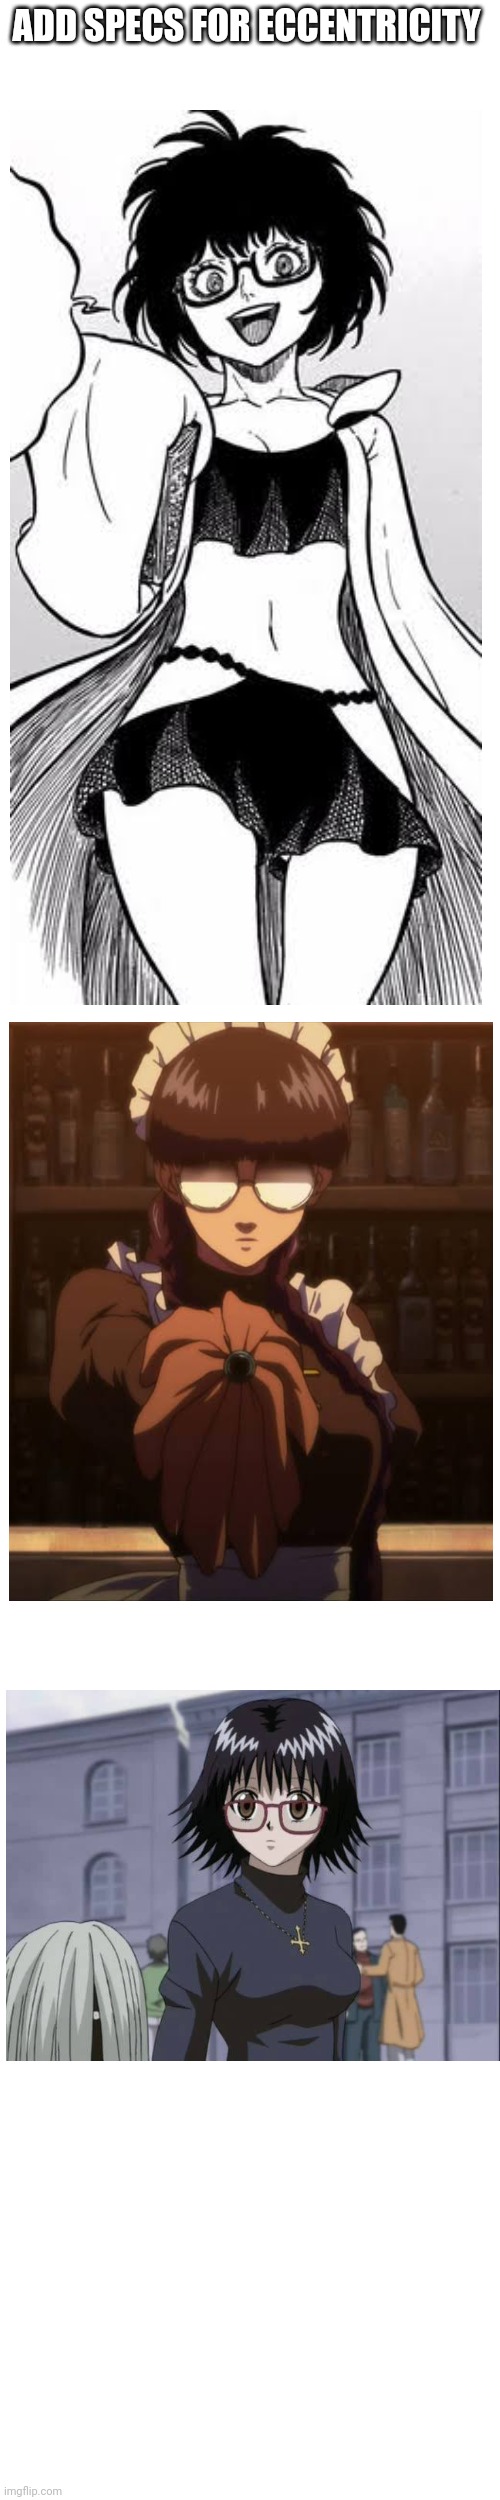 Add specs for eccentricity | ADD SPECS FOR ECCENTRICITY | image tagged in anime girl | made w/ Imgflip meme maker